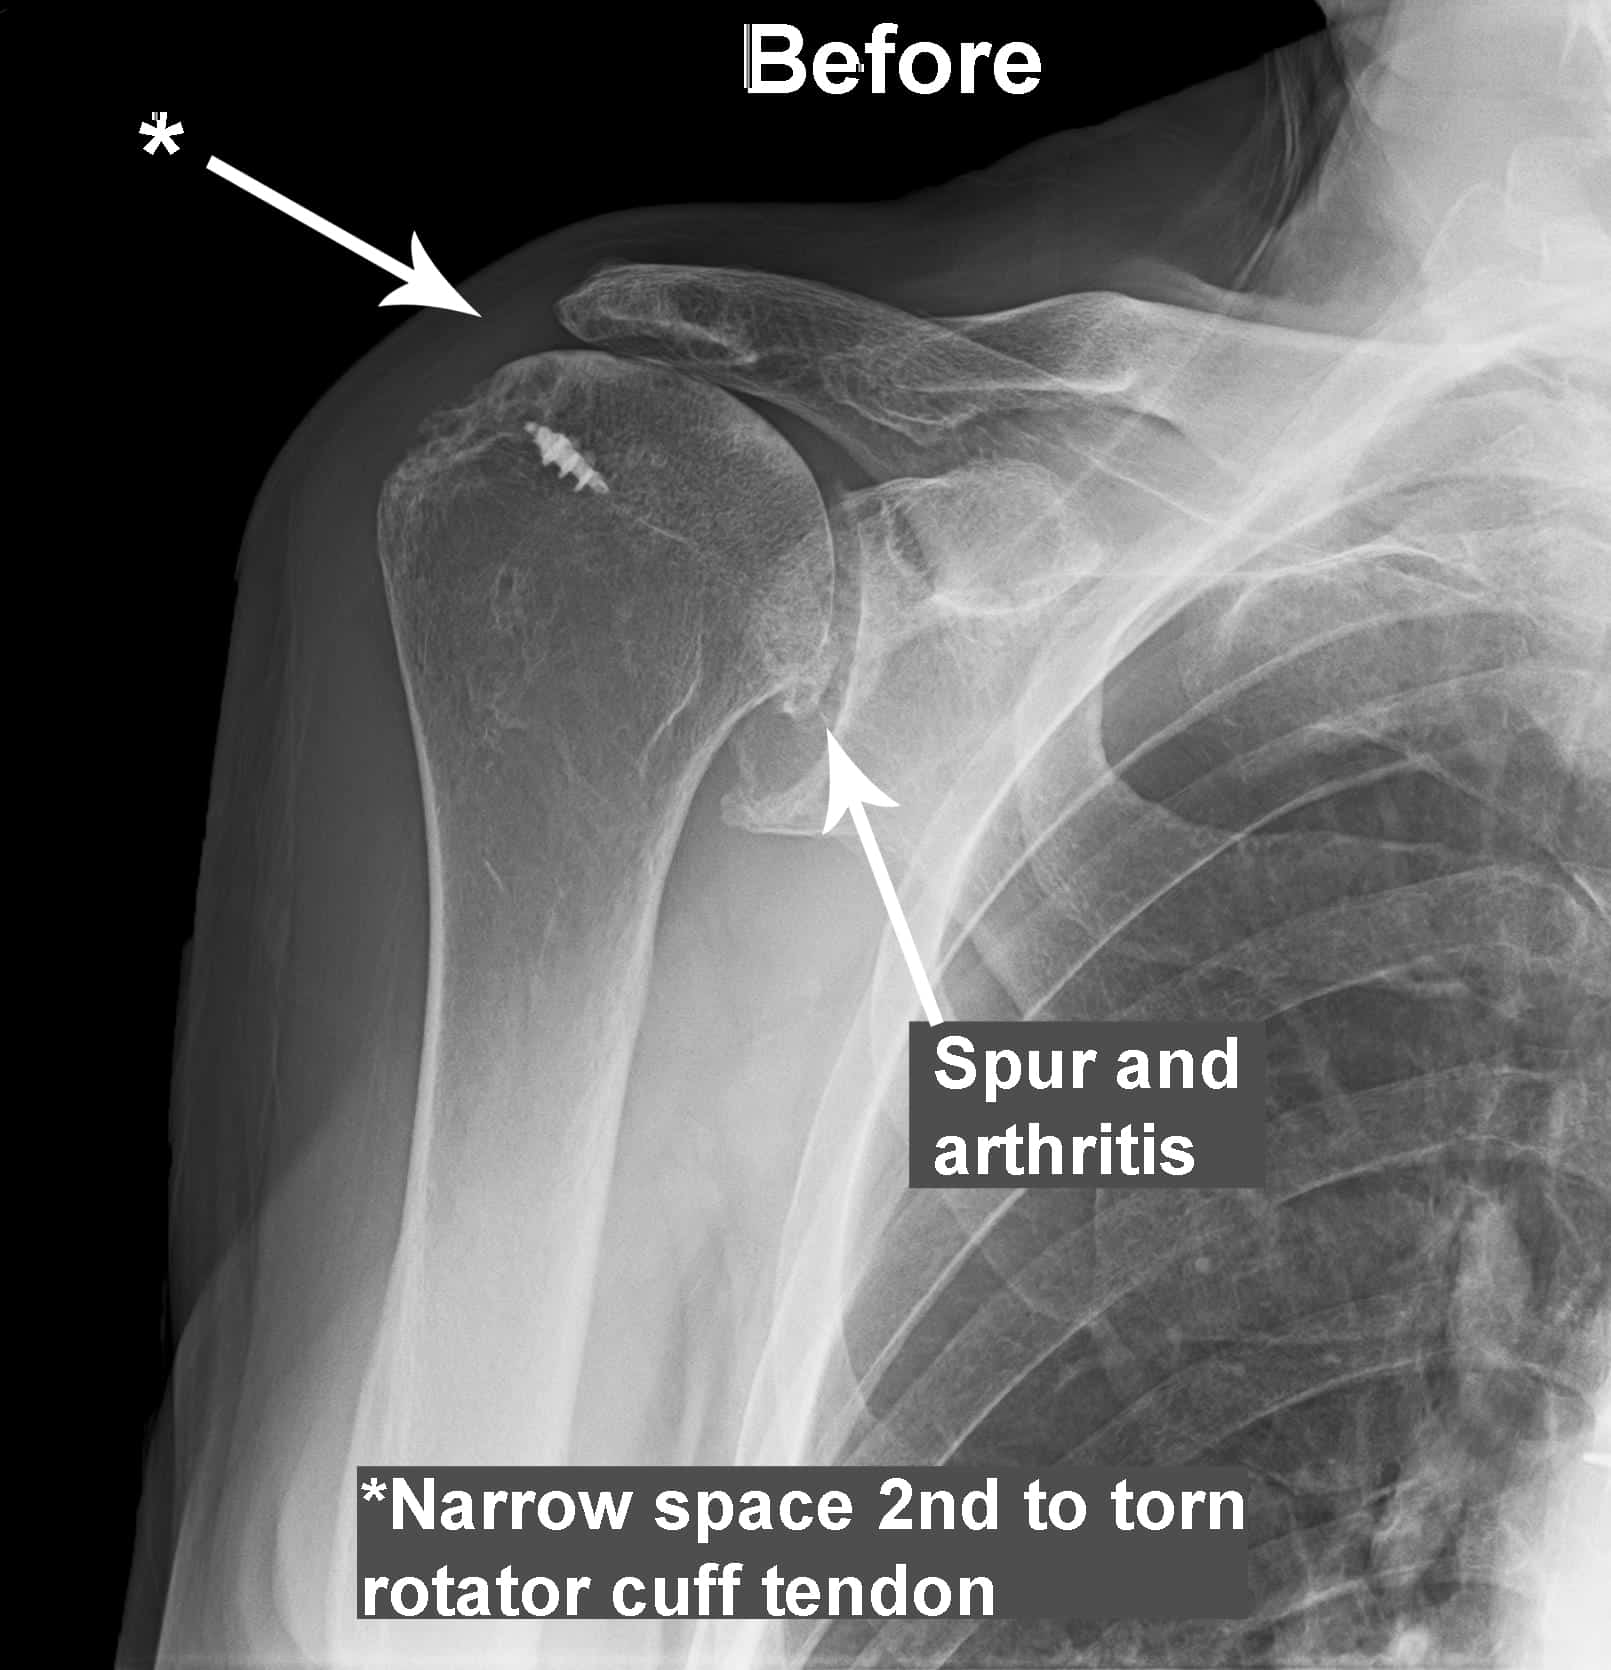 Partial or Total Shoulder Replacement